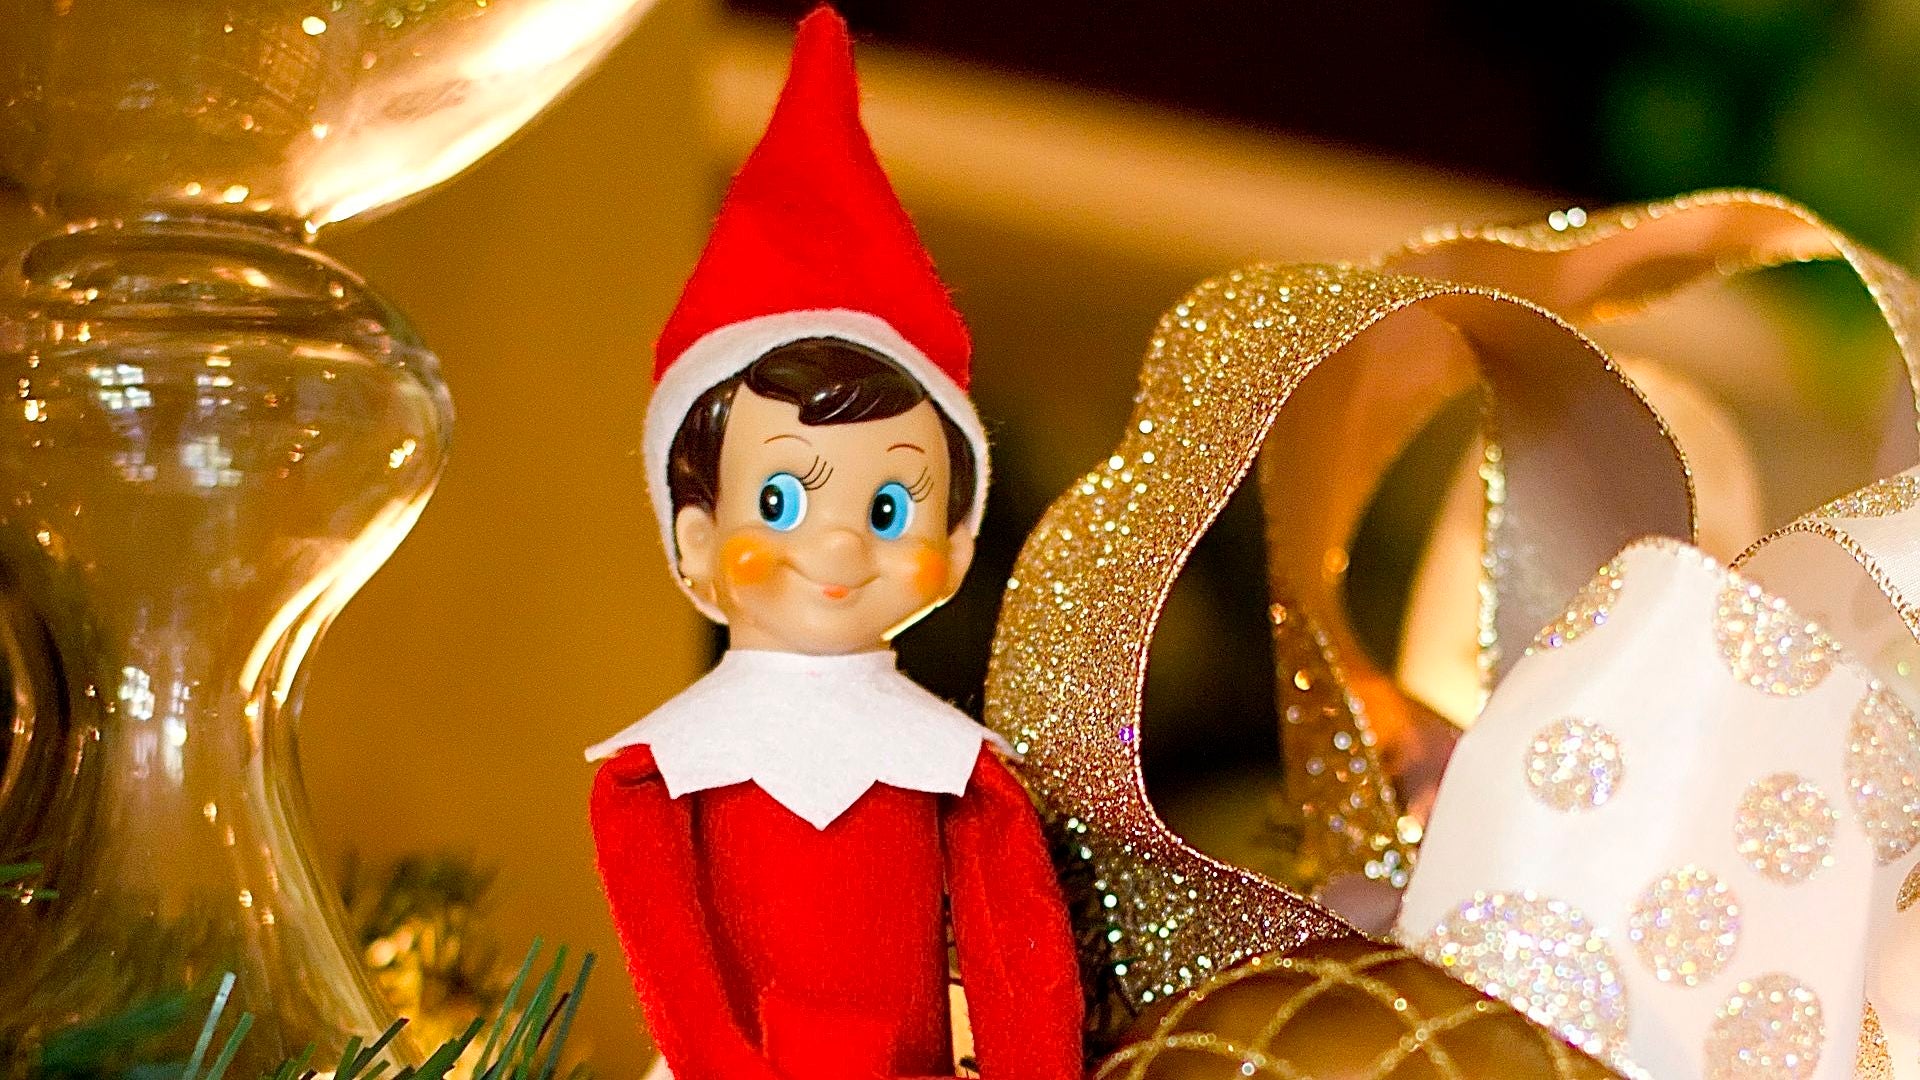 This photo provided by CCB&A, LLC, shows the Elf sitting on the Shelf. There is one hot item this holiday season that won't be resting under the Christmas tree. It will be on a shelf _ watching you. (AP Photo/CCA&B, LLC)